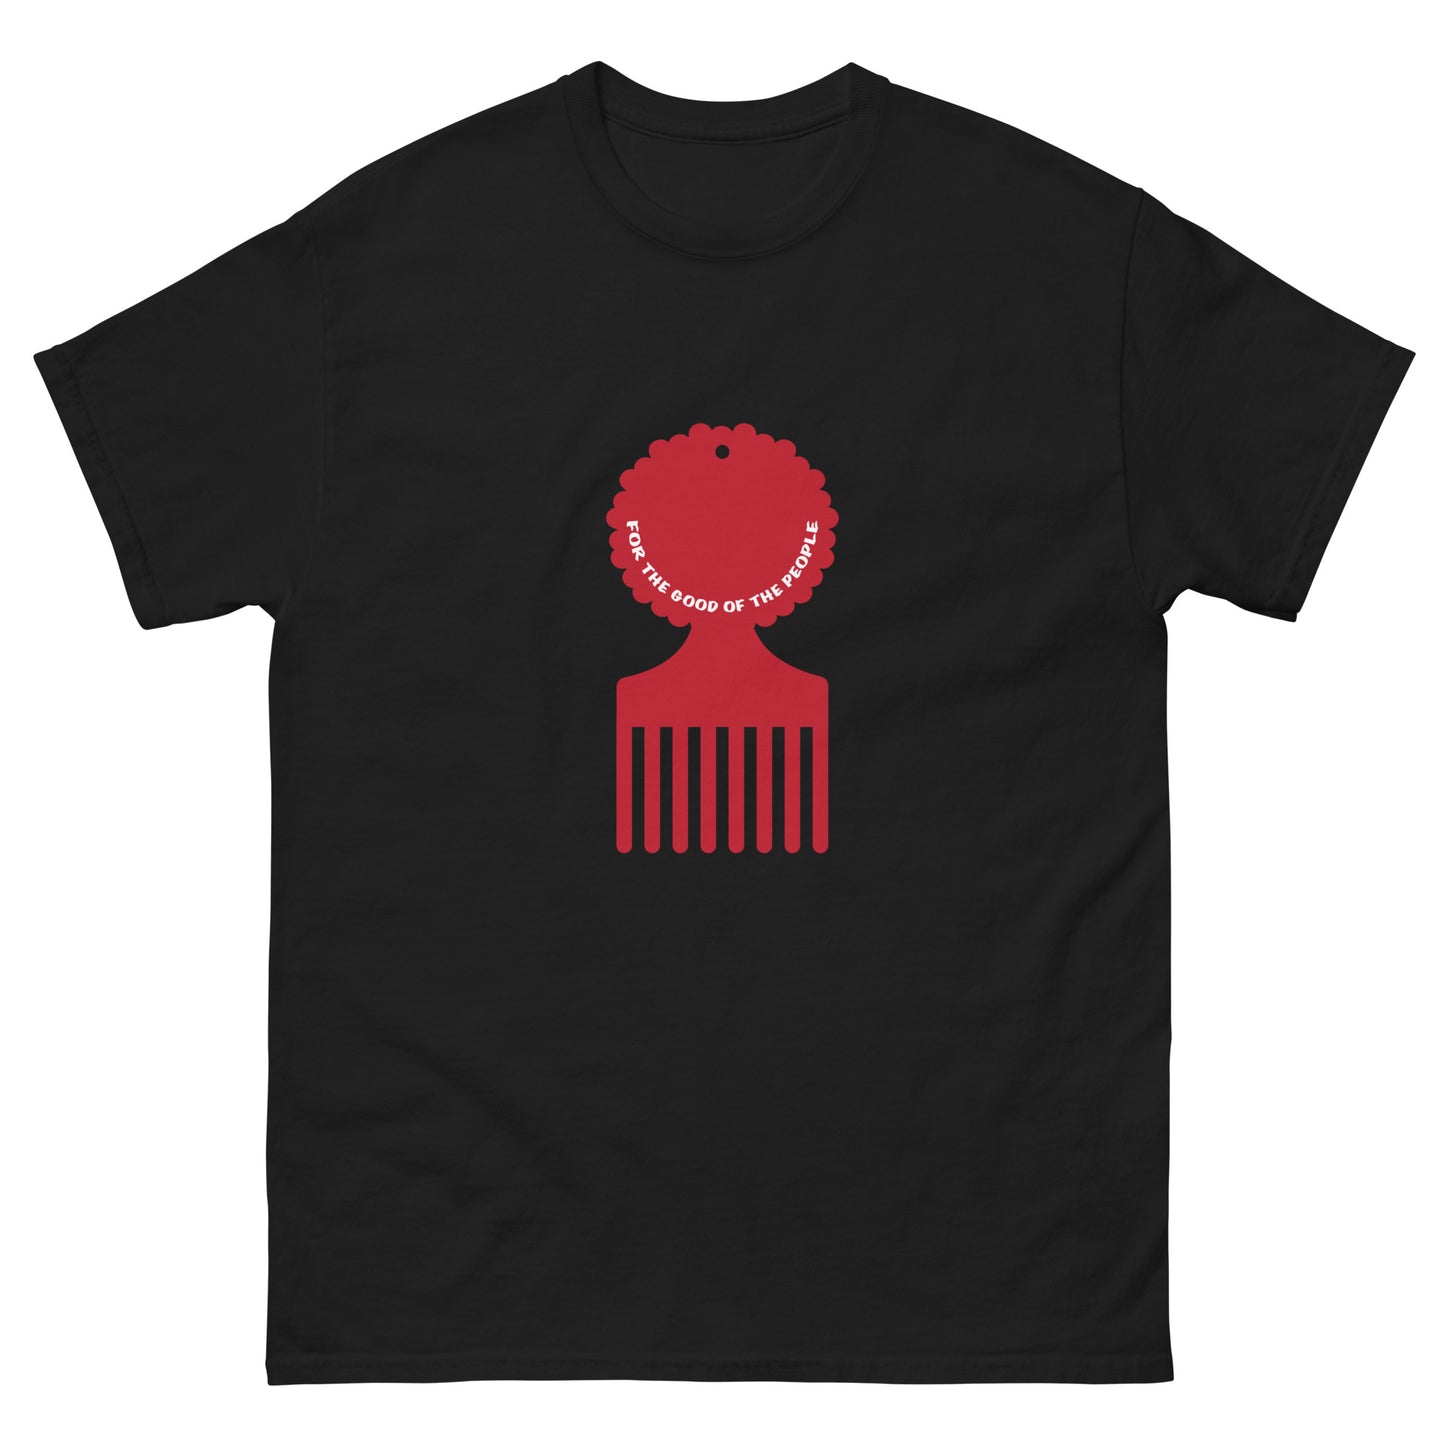 Men's black tee with red afro pick in the center of shirt, with for the good of the people in white inside the afro pick's handle.